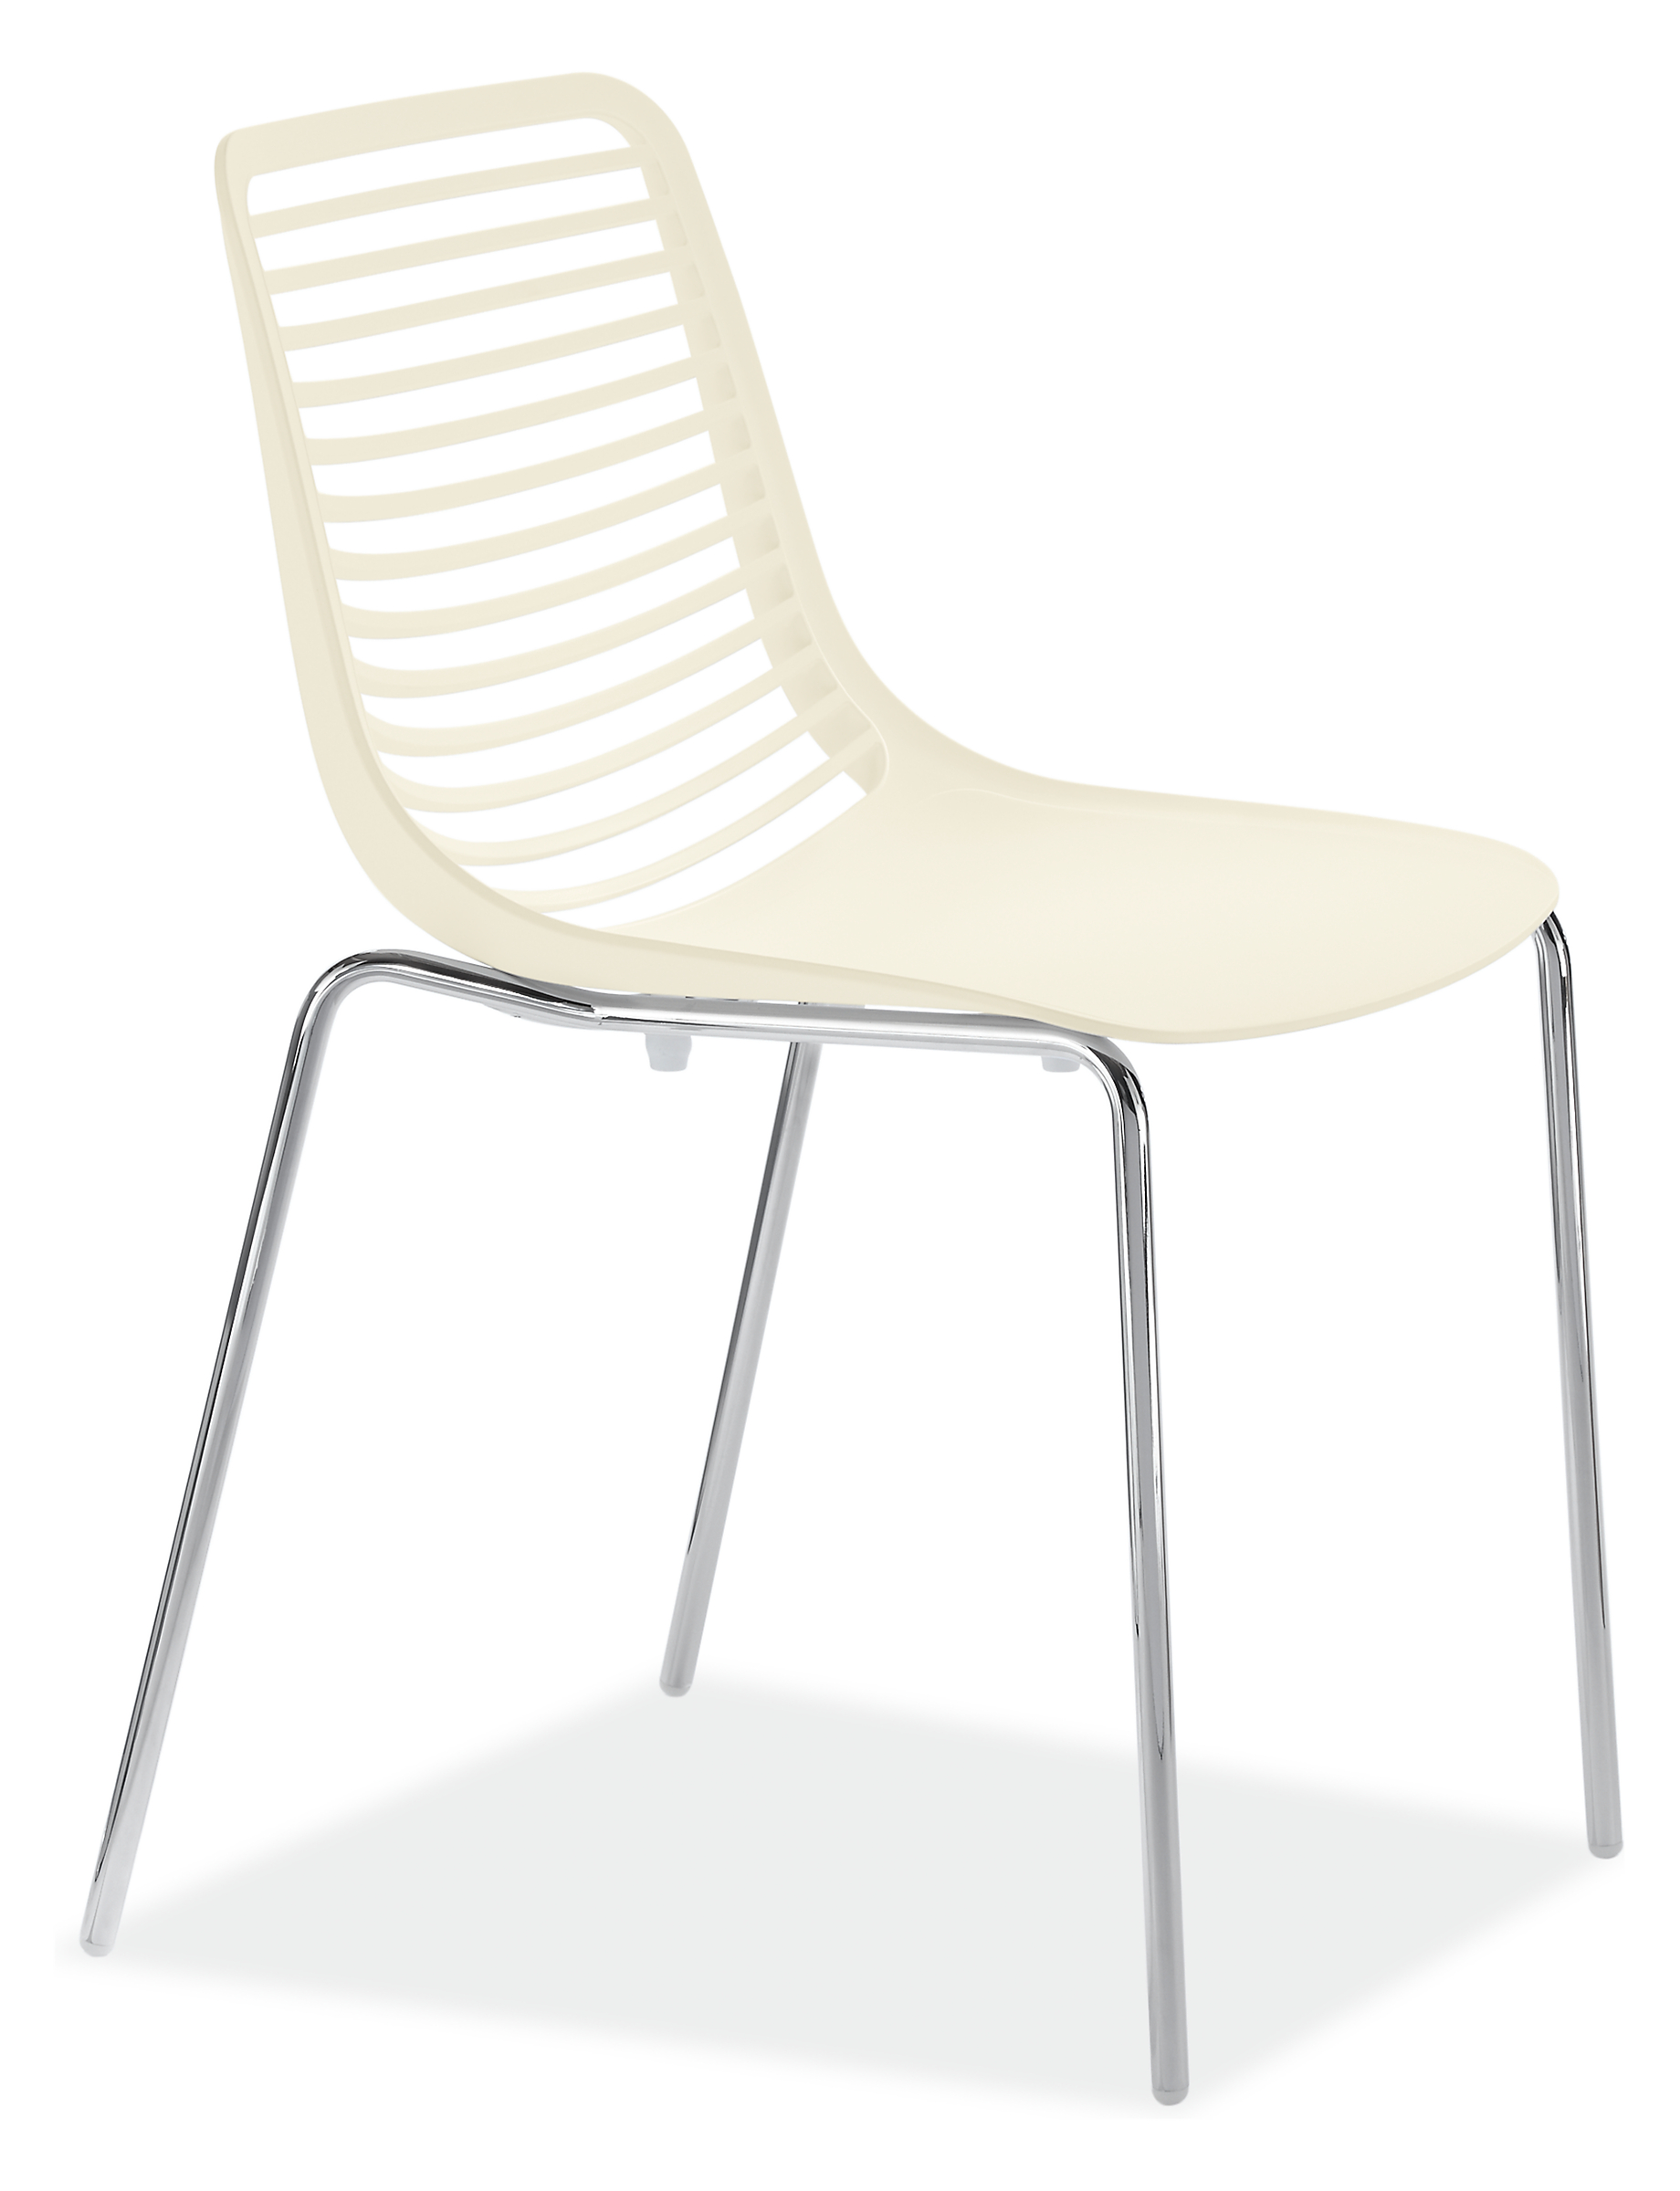 Angled view of Mini Side Chair.